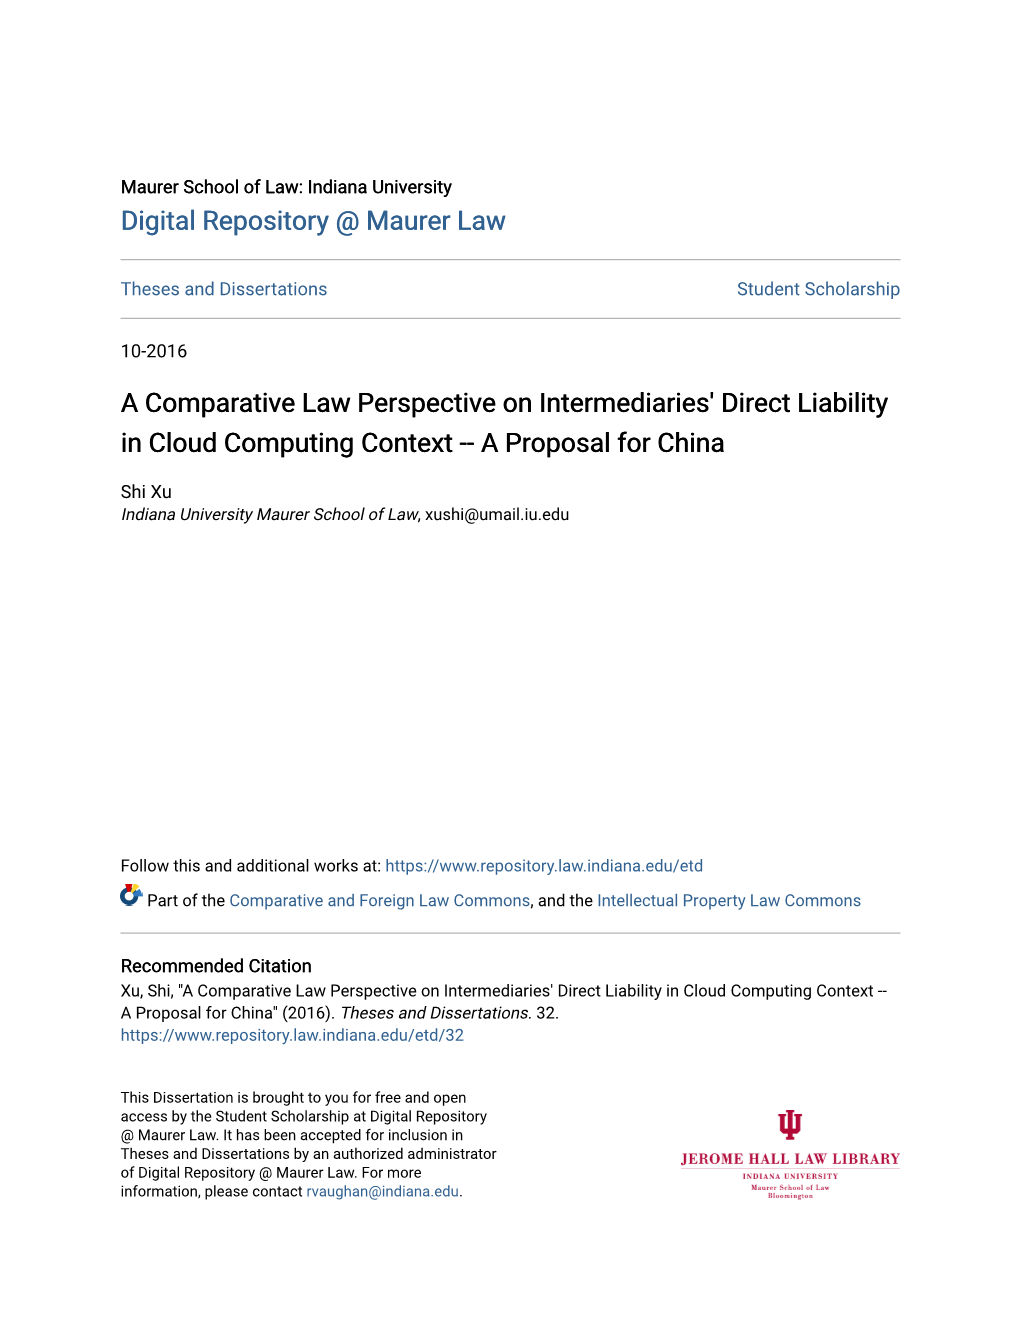 A Comparative Law Perspective on Intermediaries' Direct Liability in Cloud Computing Context -- a Proposal for China